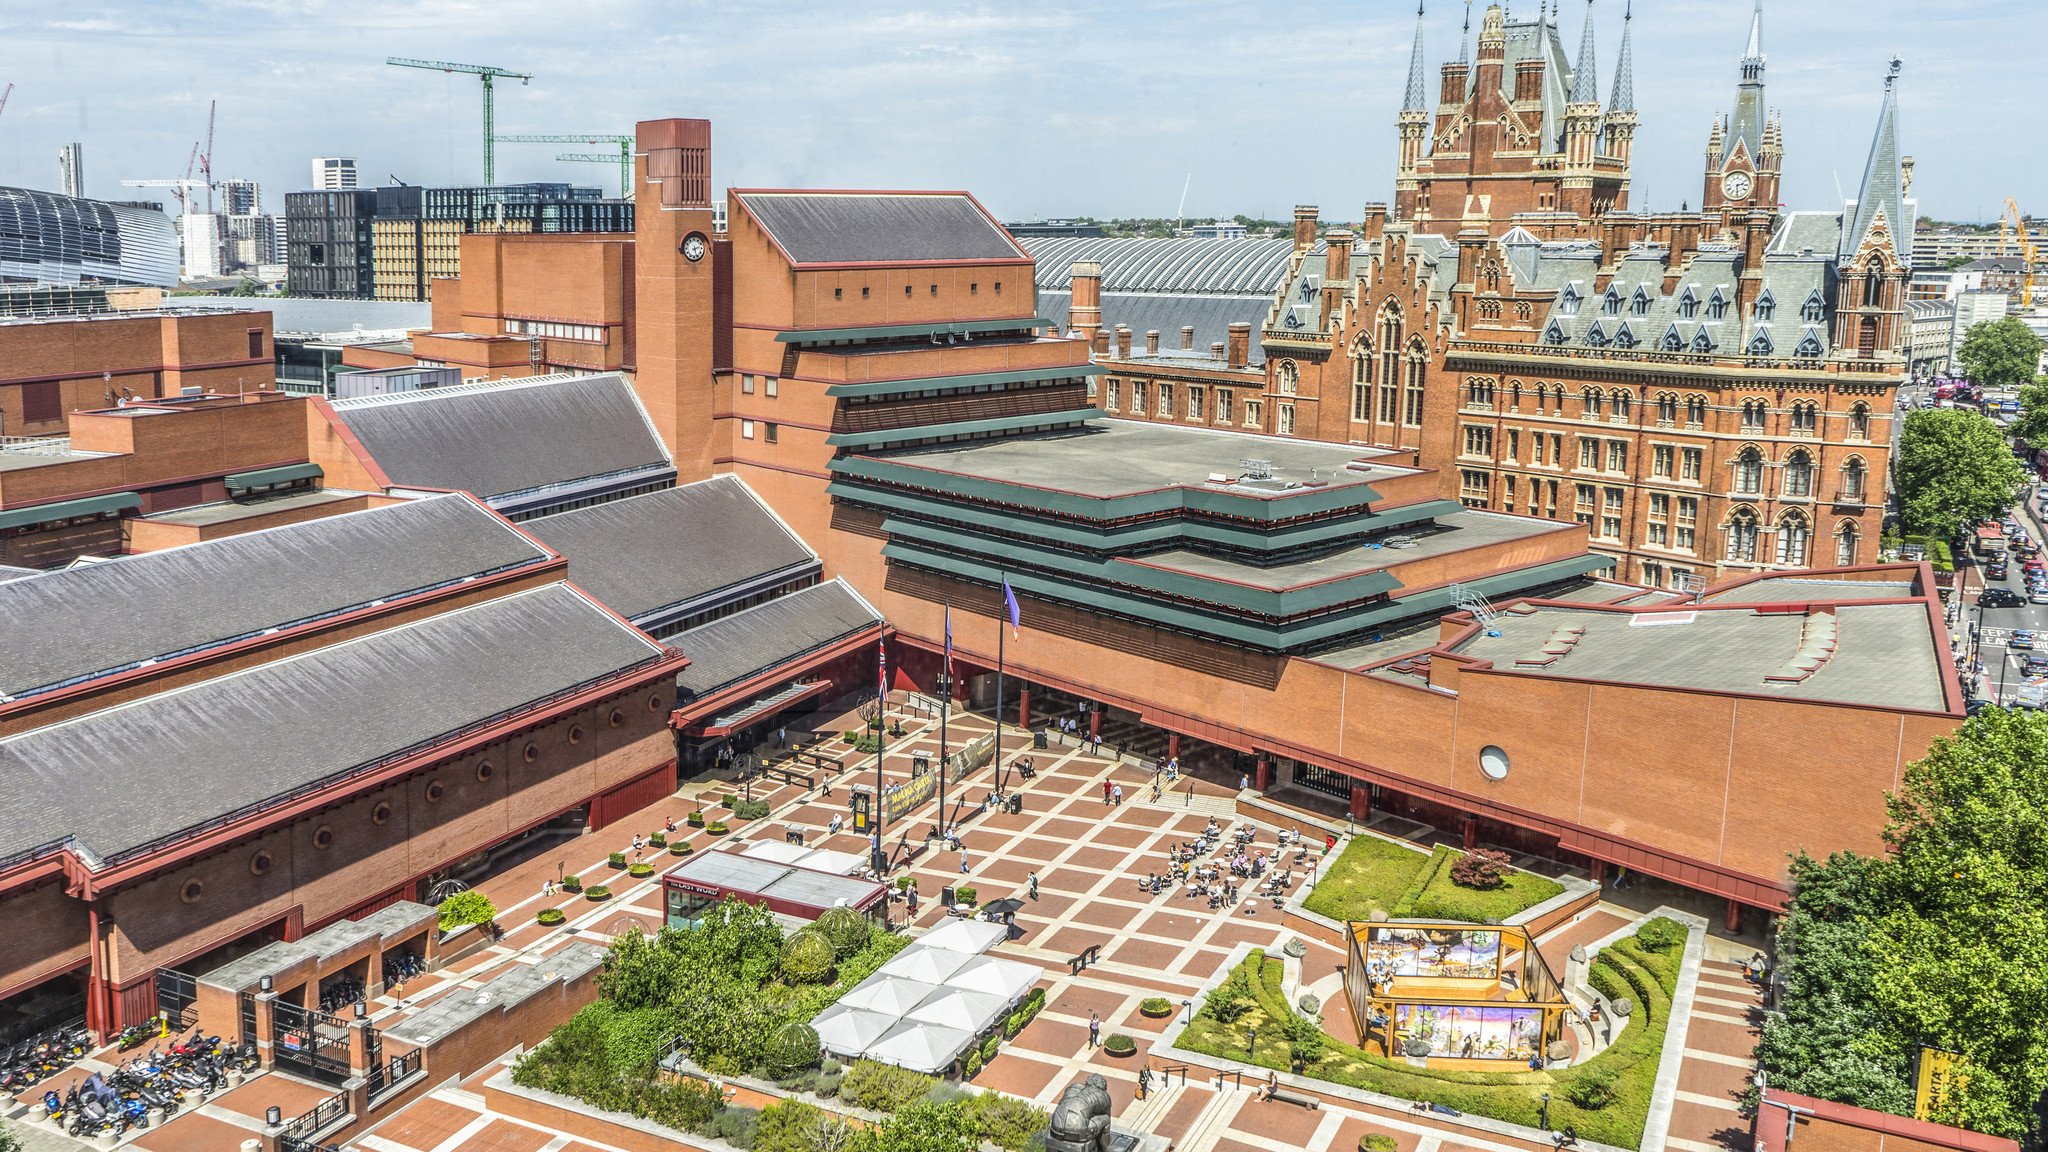 Digital Marketing Courses - The British Library